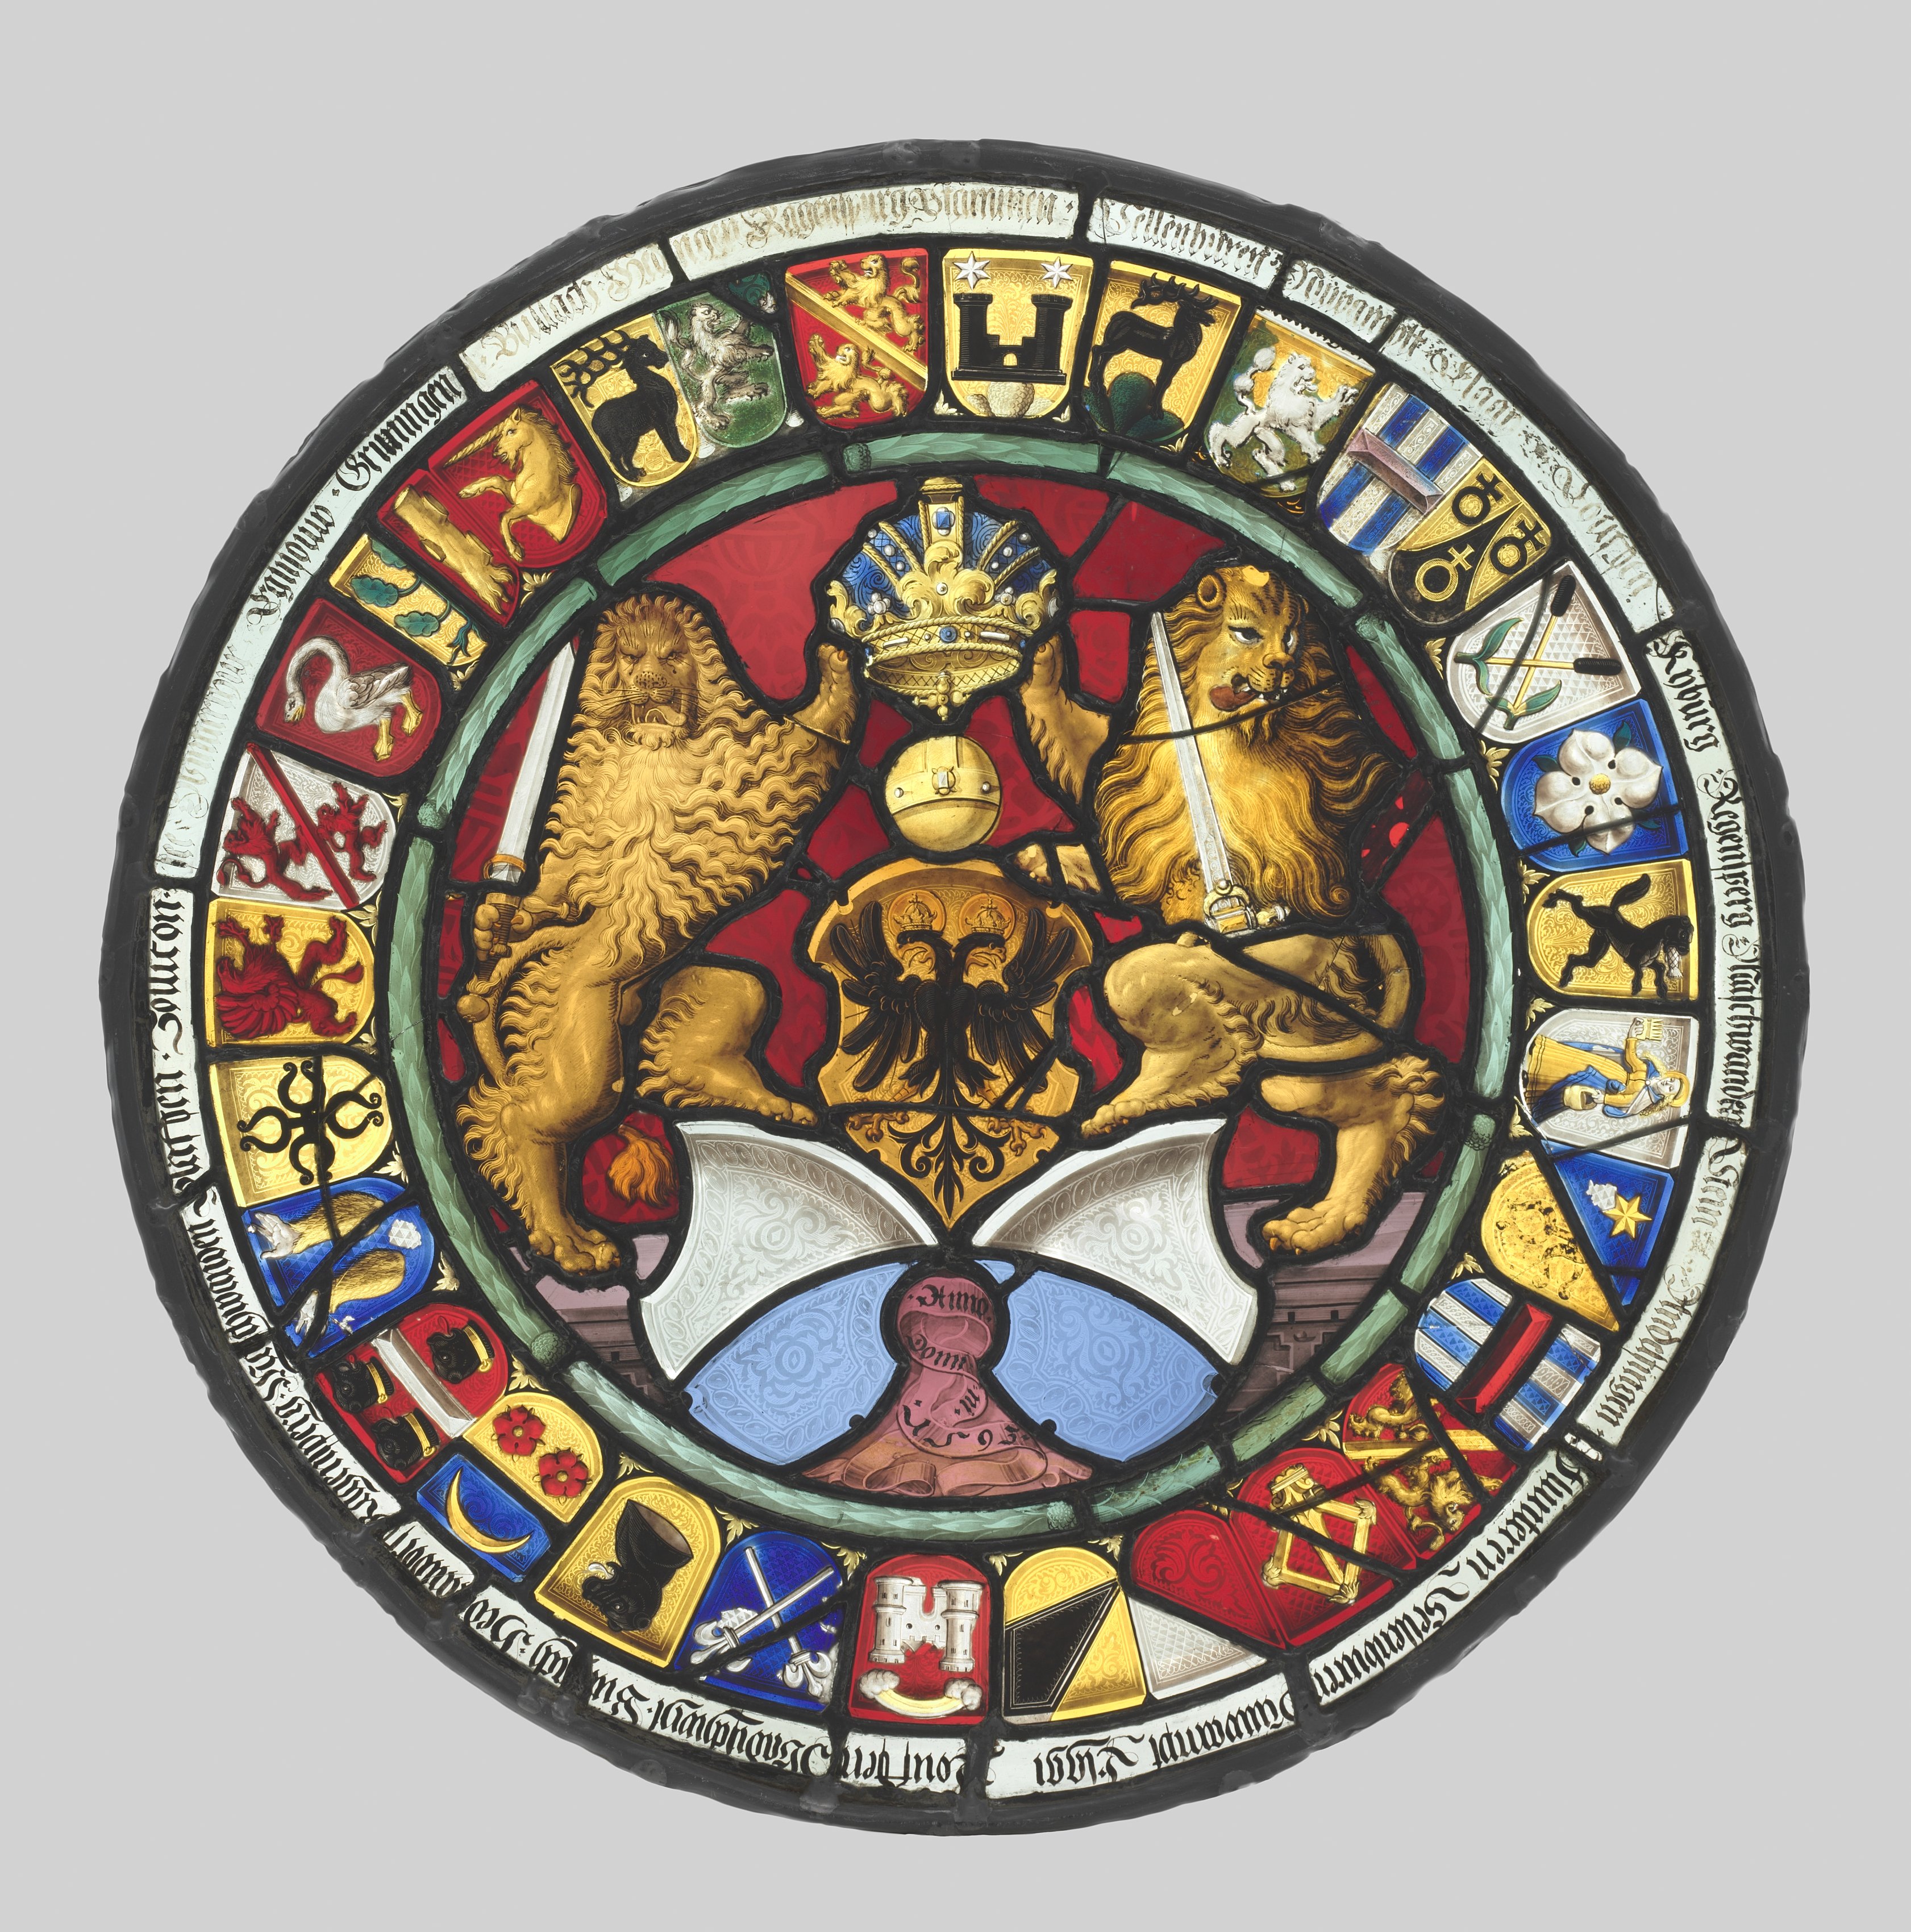 Heraldic Roundel with Arms of the Canton of Zürich